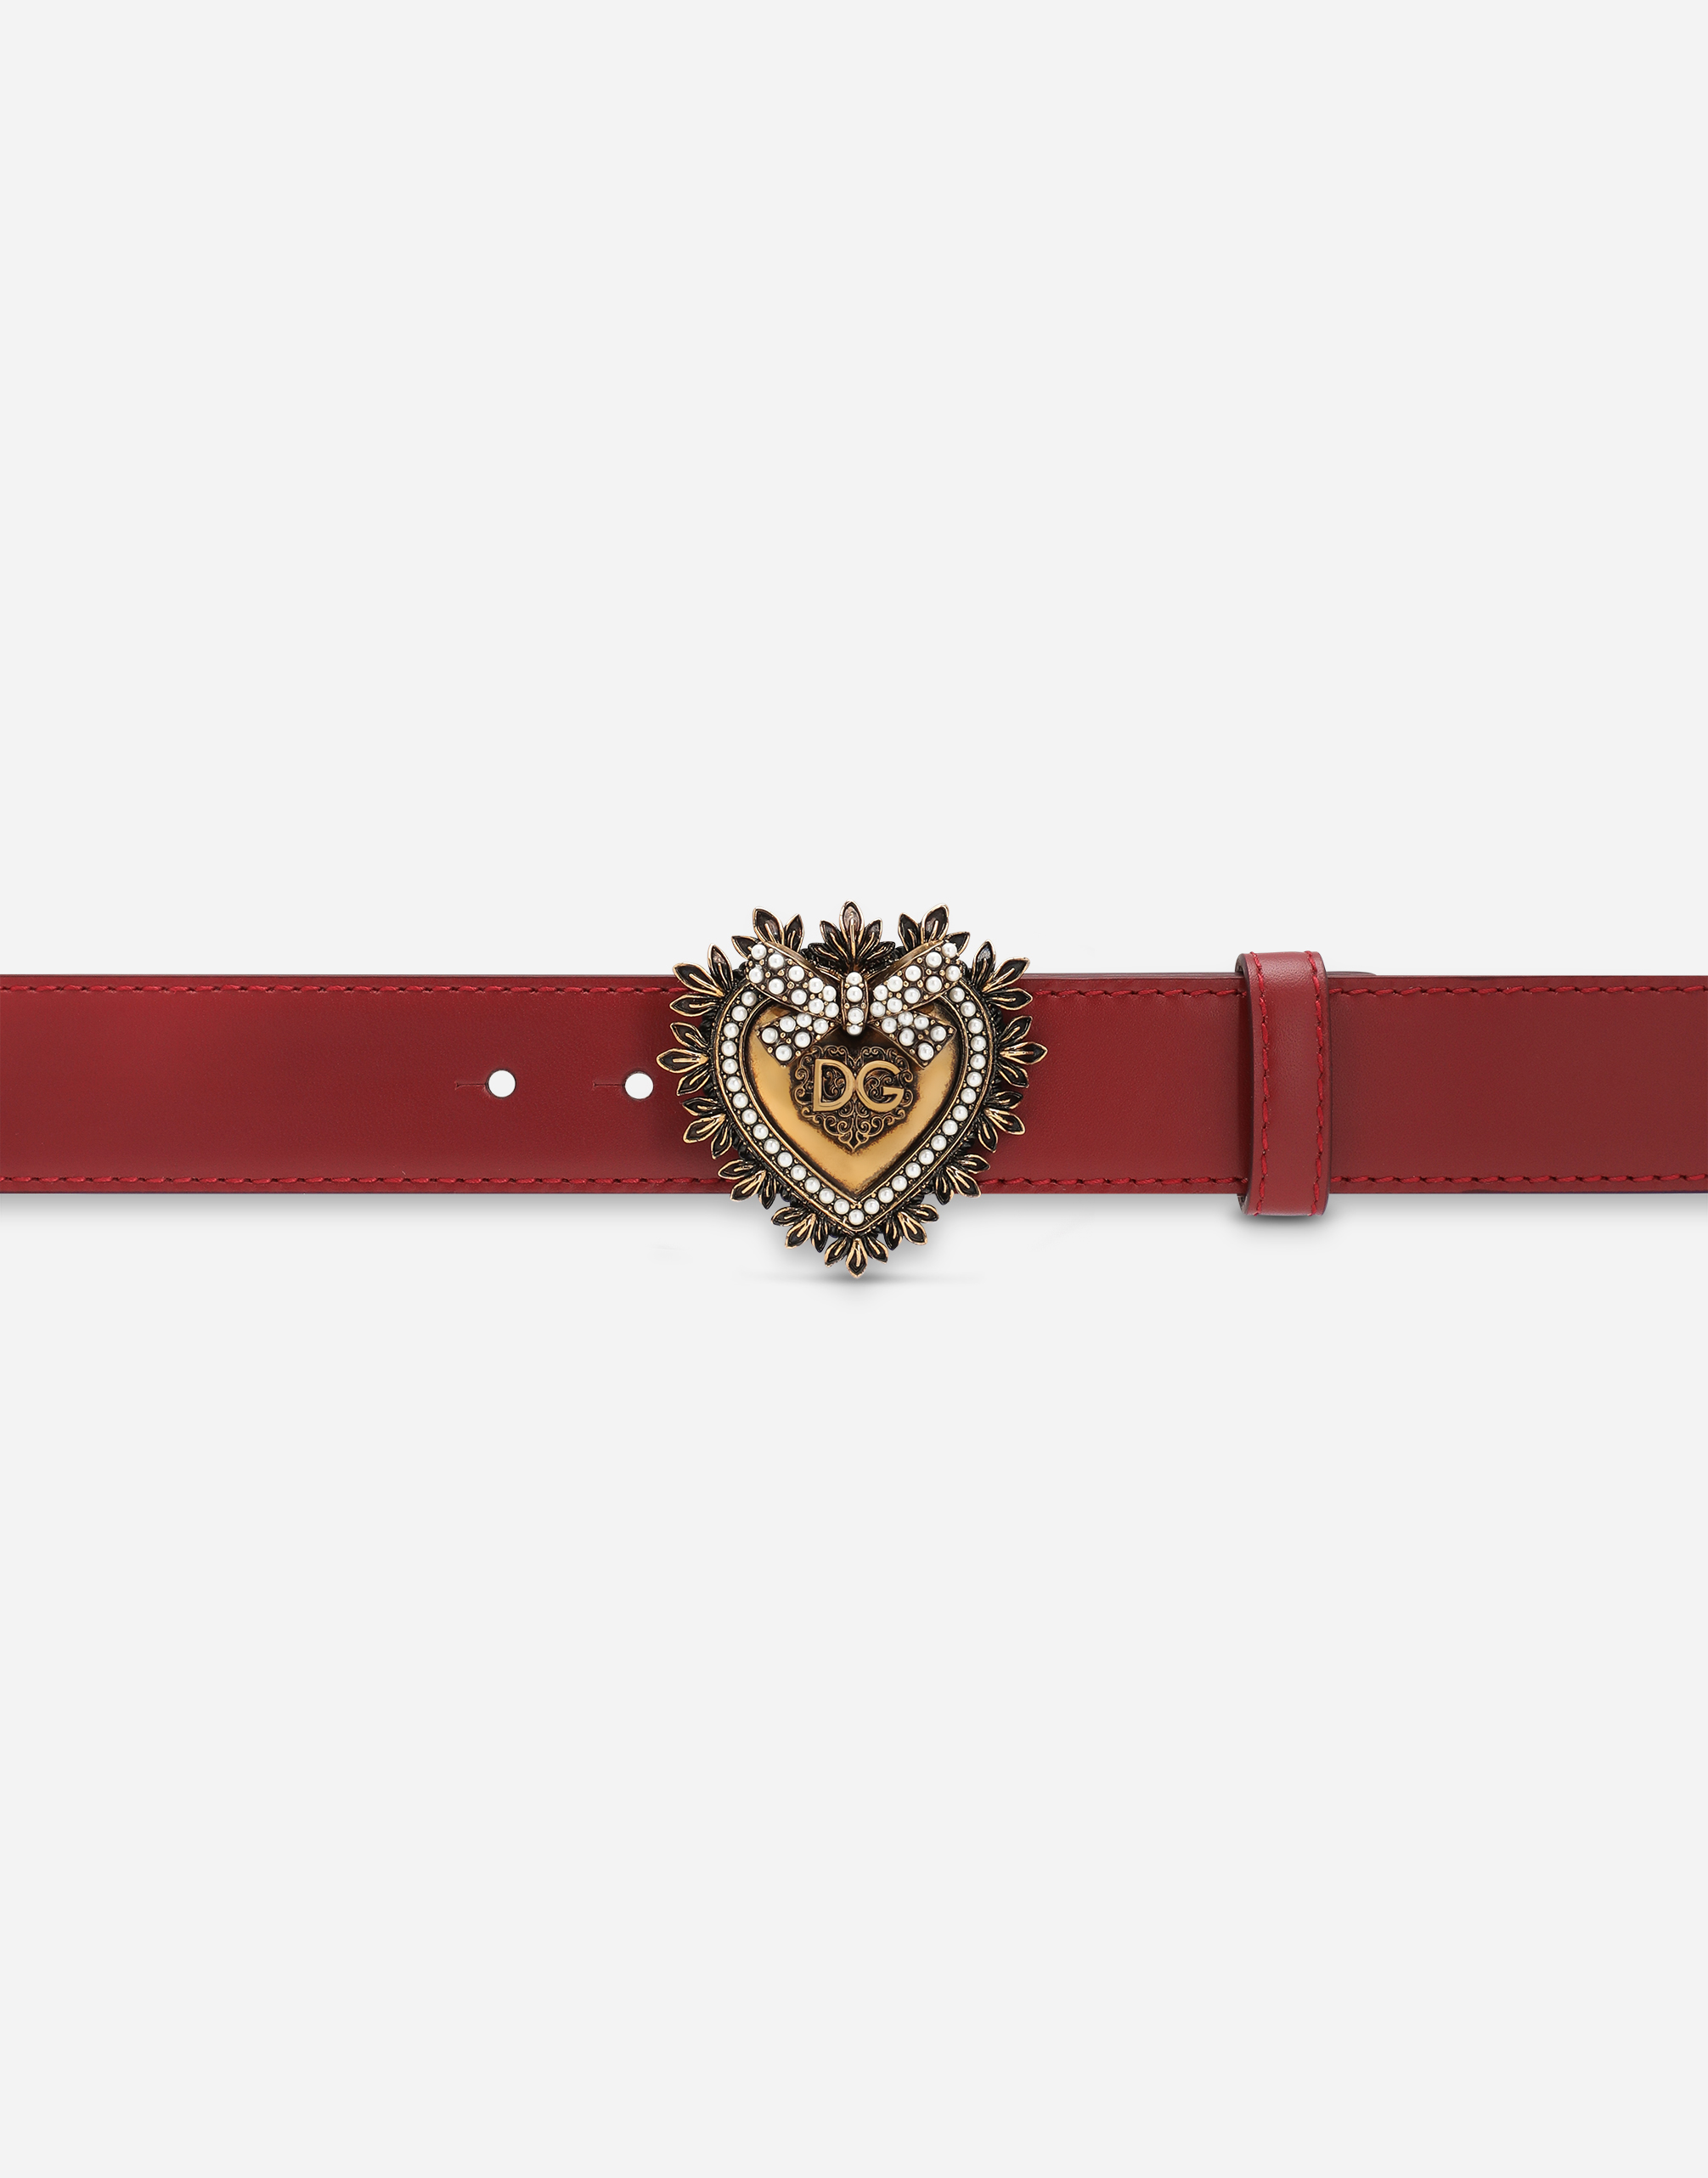 dolce and gabbana red belt